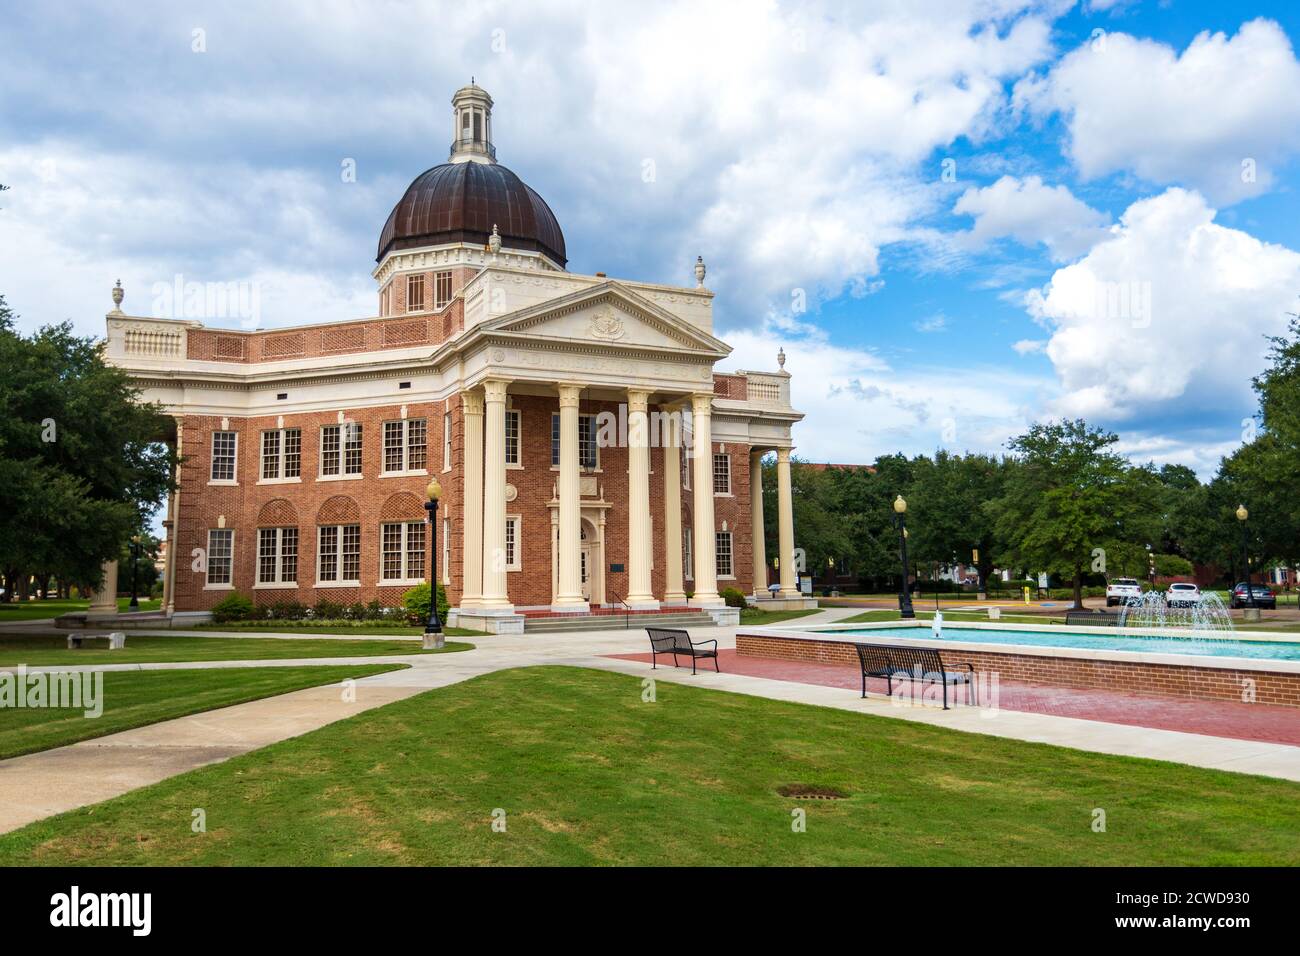 Hattiesburg, MS / USA - September 17, 2020: Iconic Administration Building of the University of Southern Mississippi Stock Photo